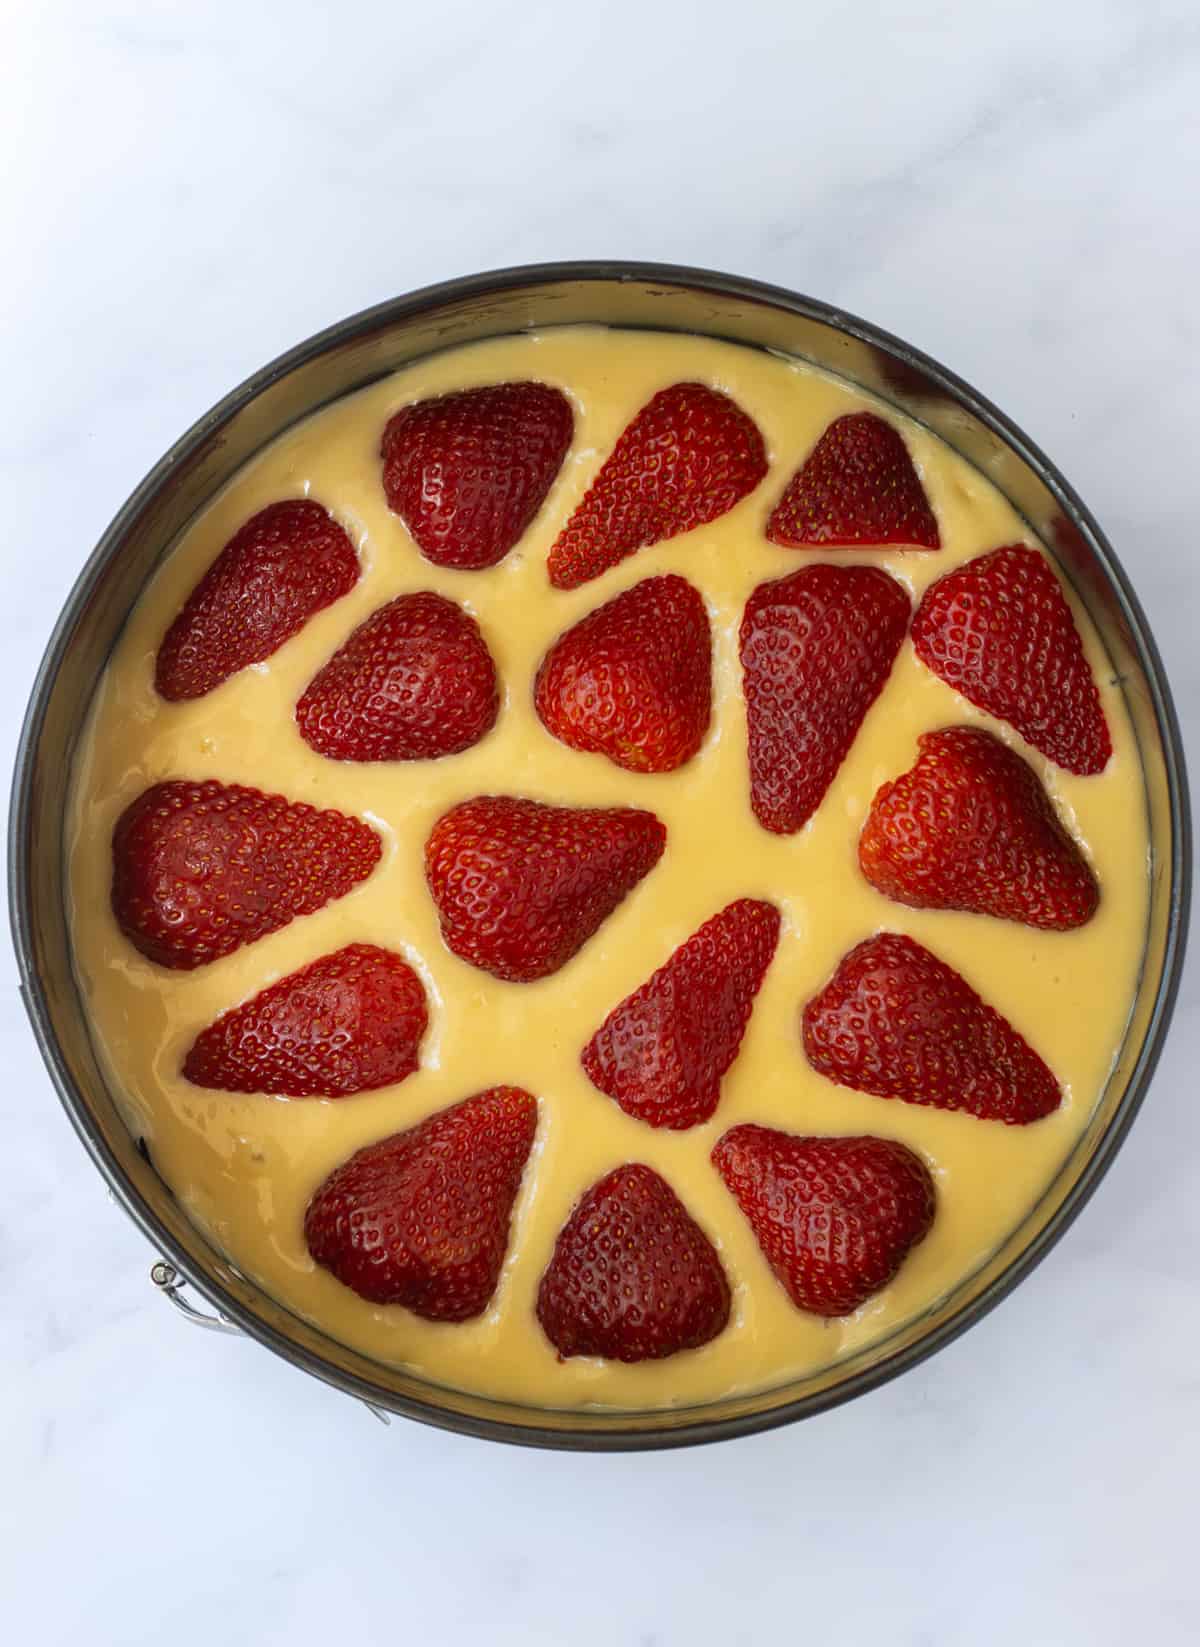 Vanilla cake batter topped with strawberry halves.